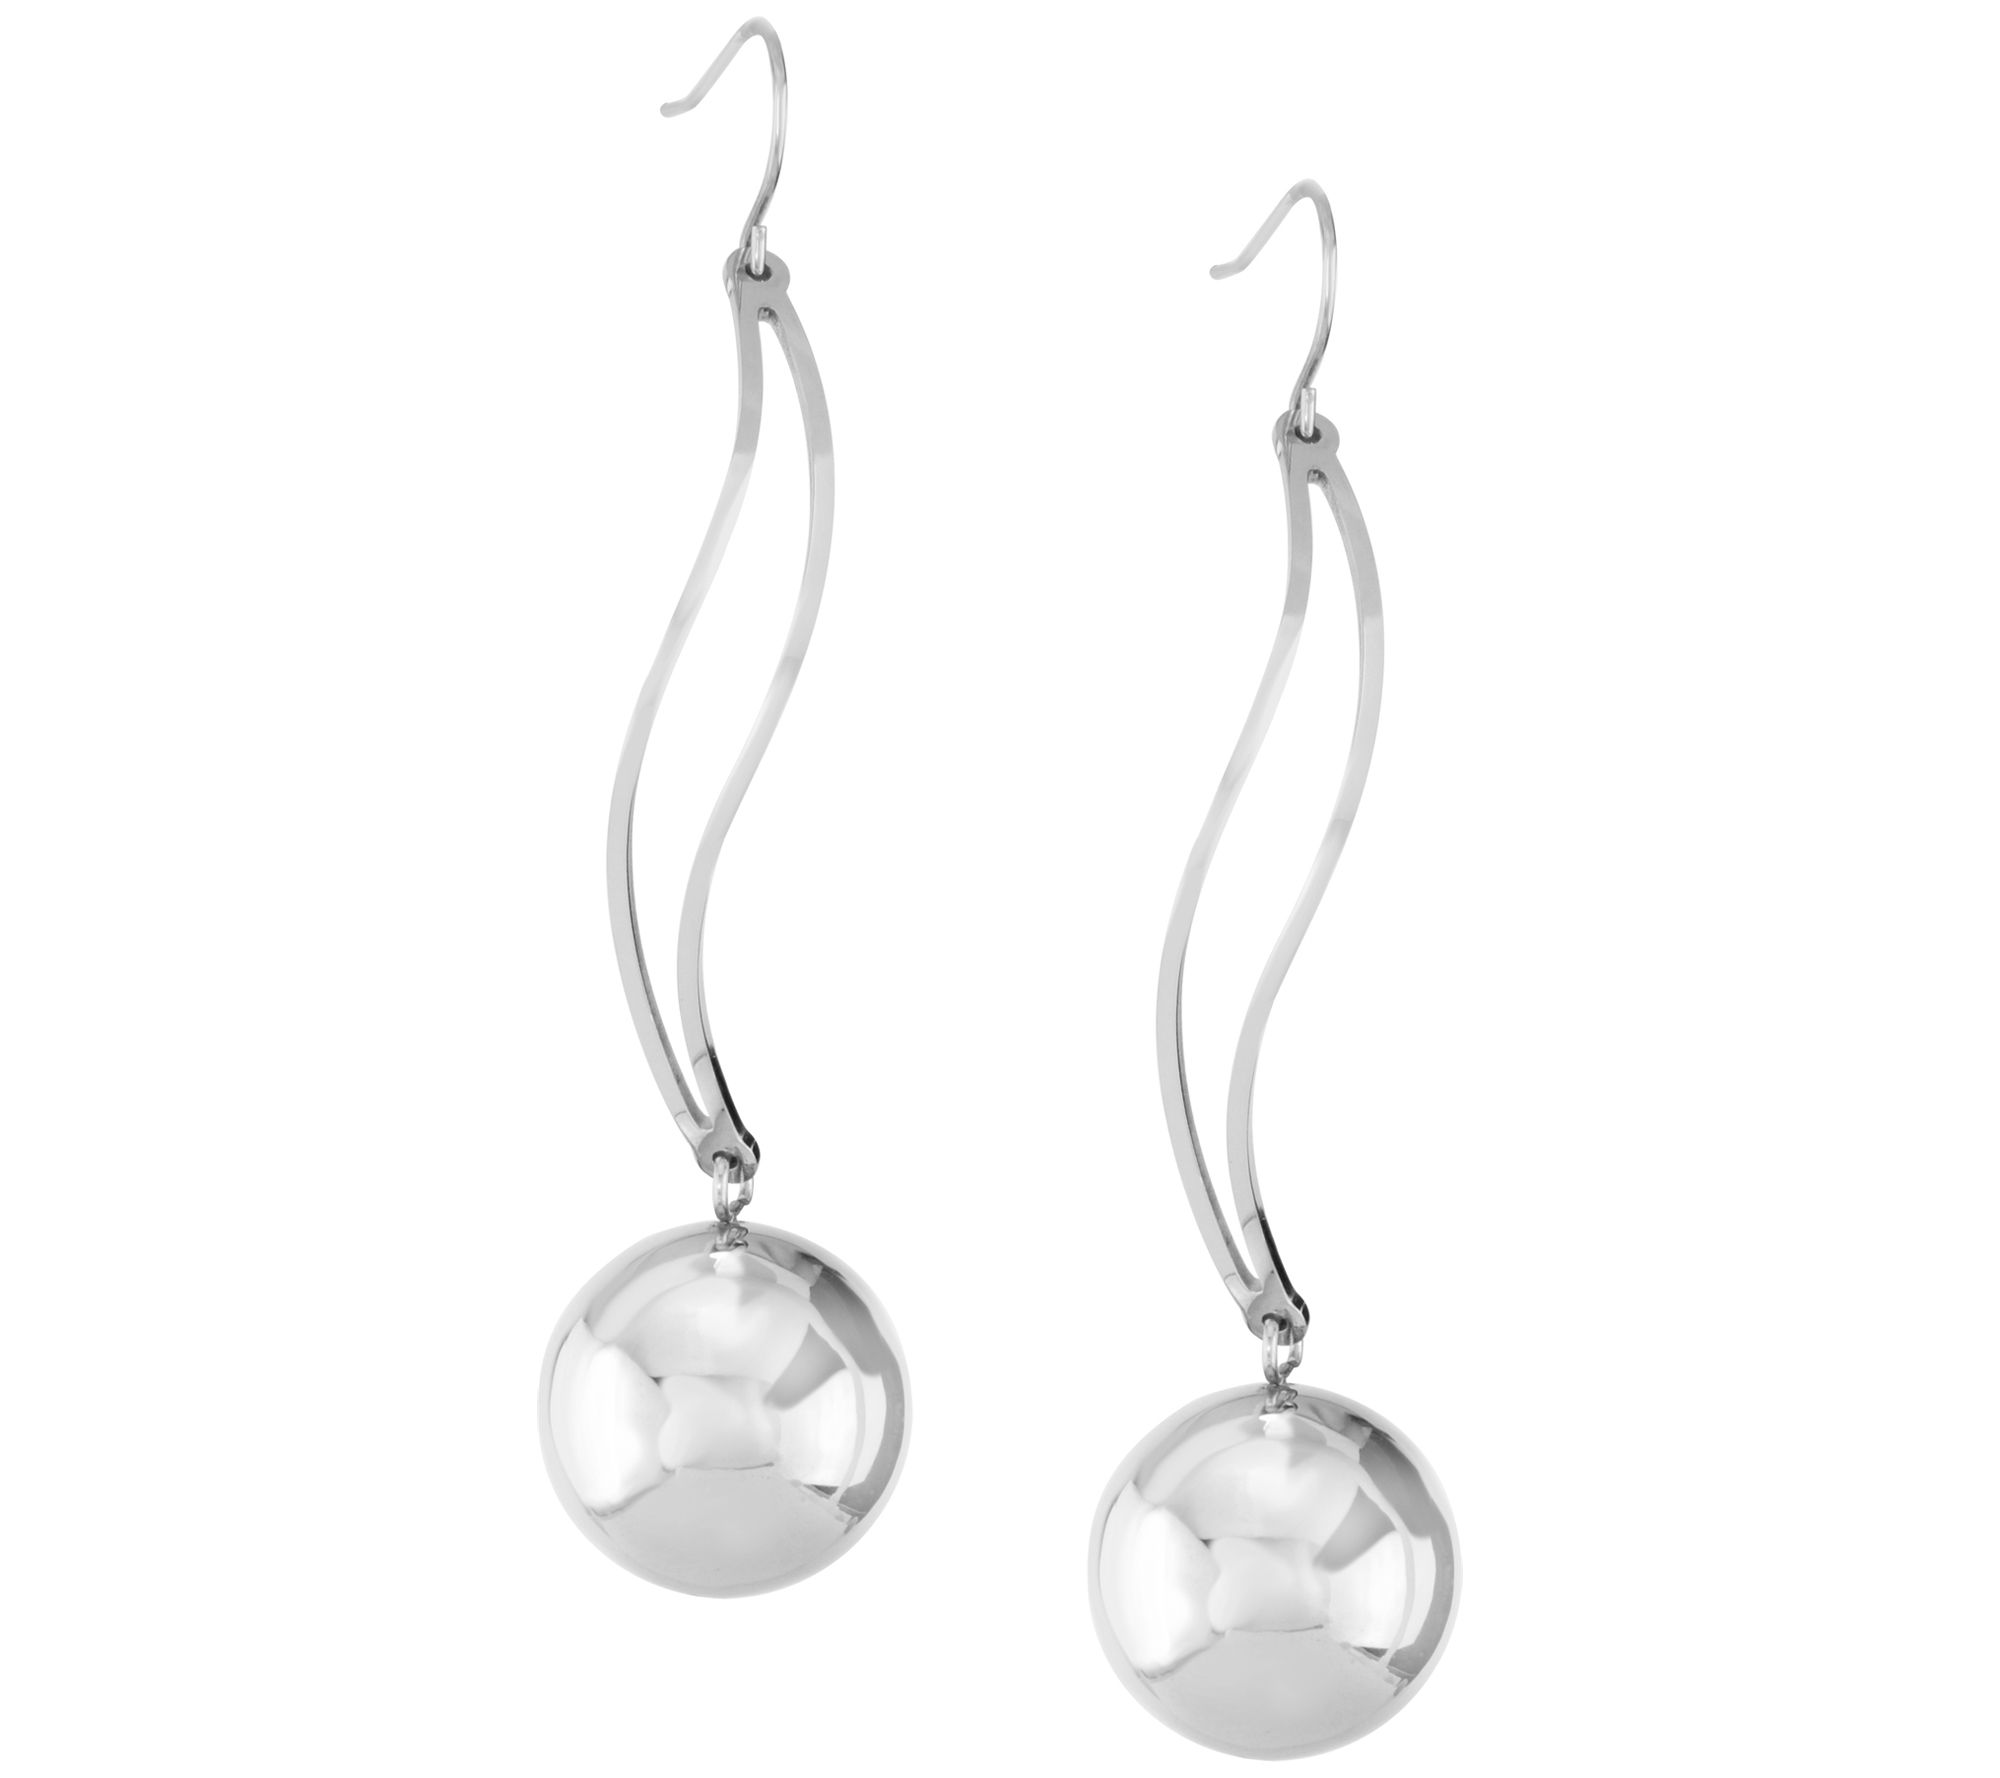 Steel by Design Stainless Bead Drop Earrings - QVC.com